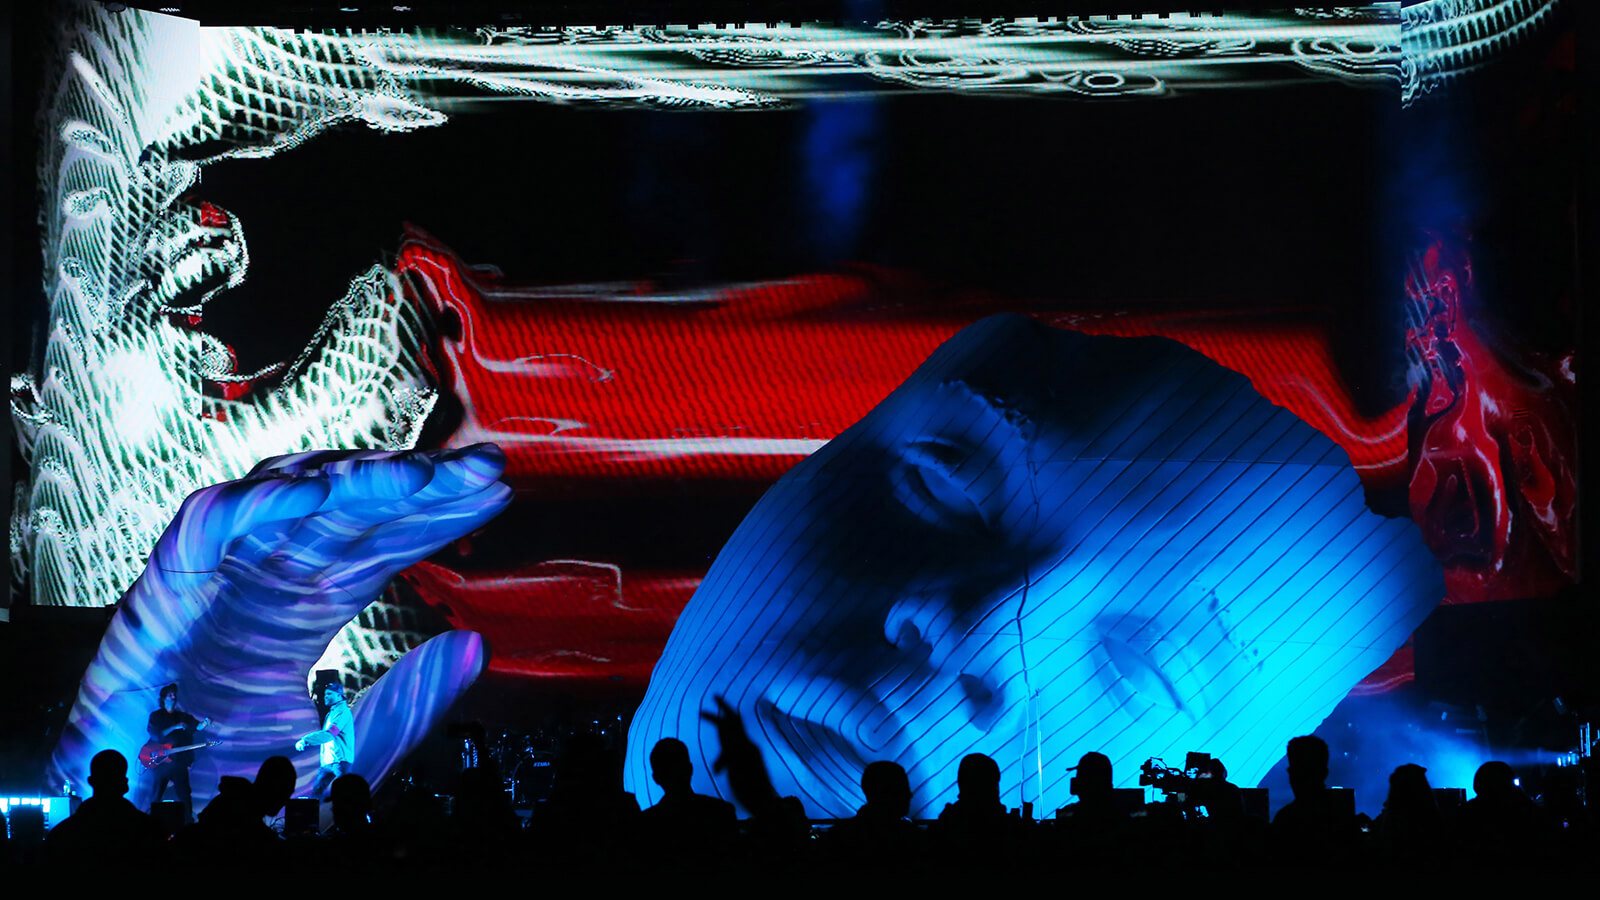 The Weekend Coachella scarred mask ES Devlin projection mapping